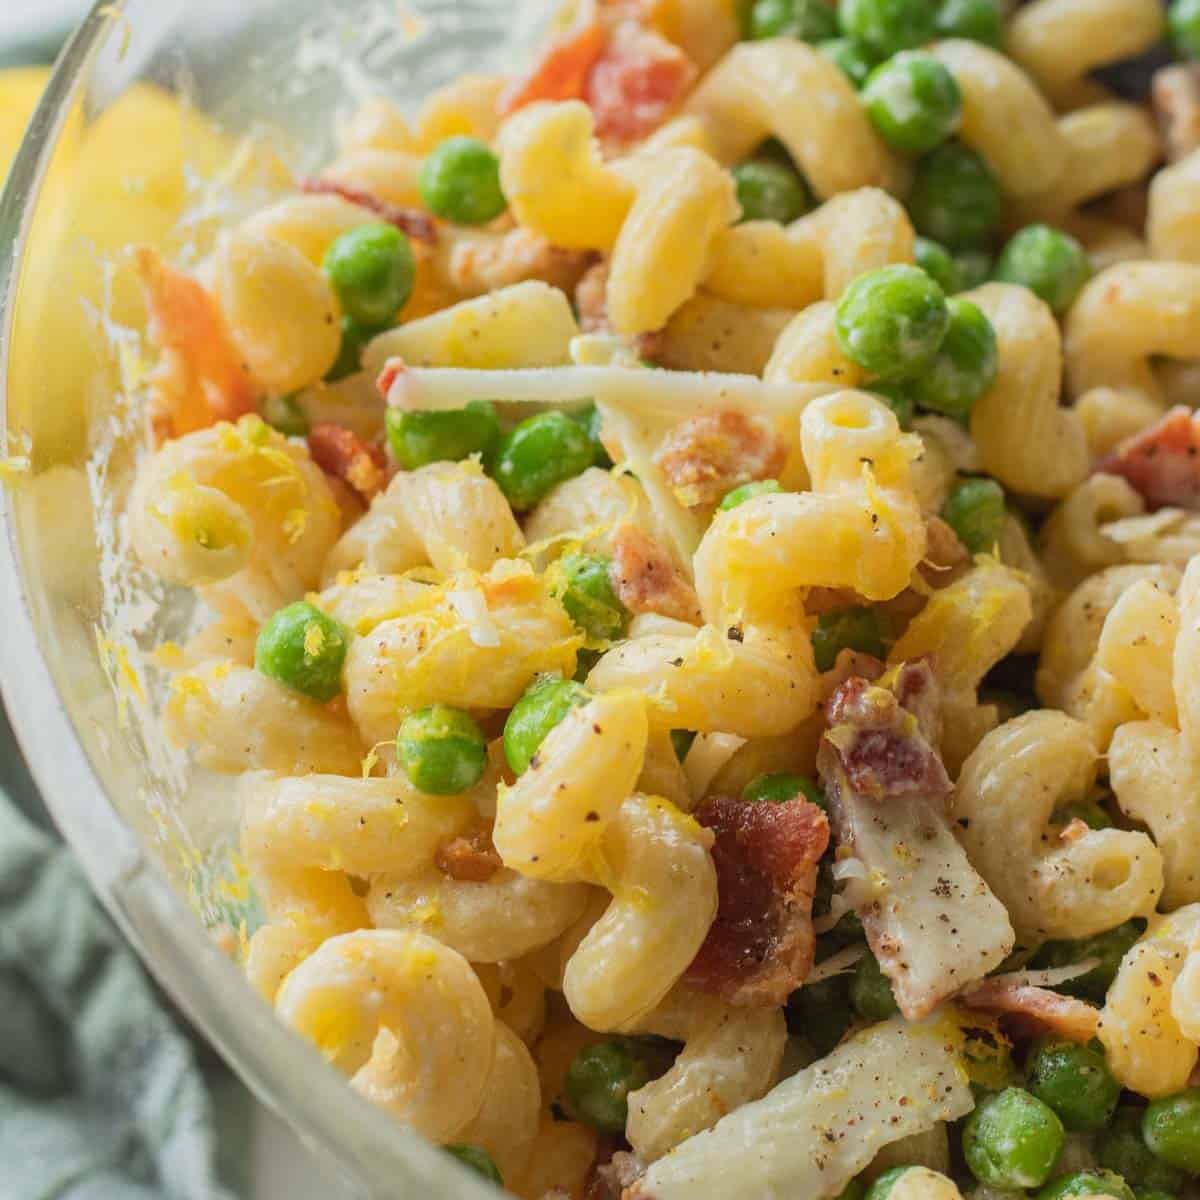 Lemon Pasta Salad with peas and bacon in clear bowl.